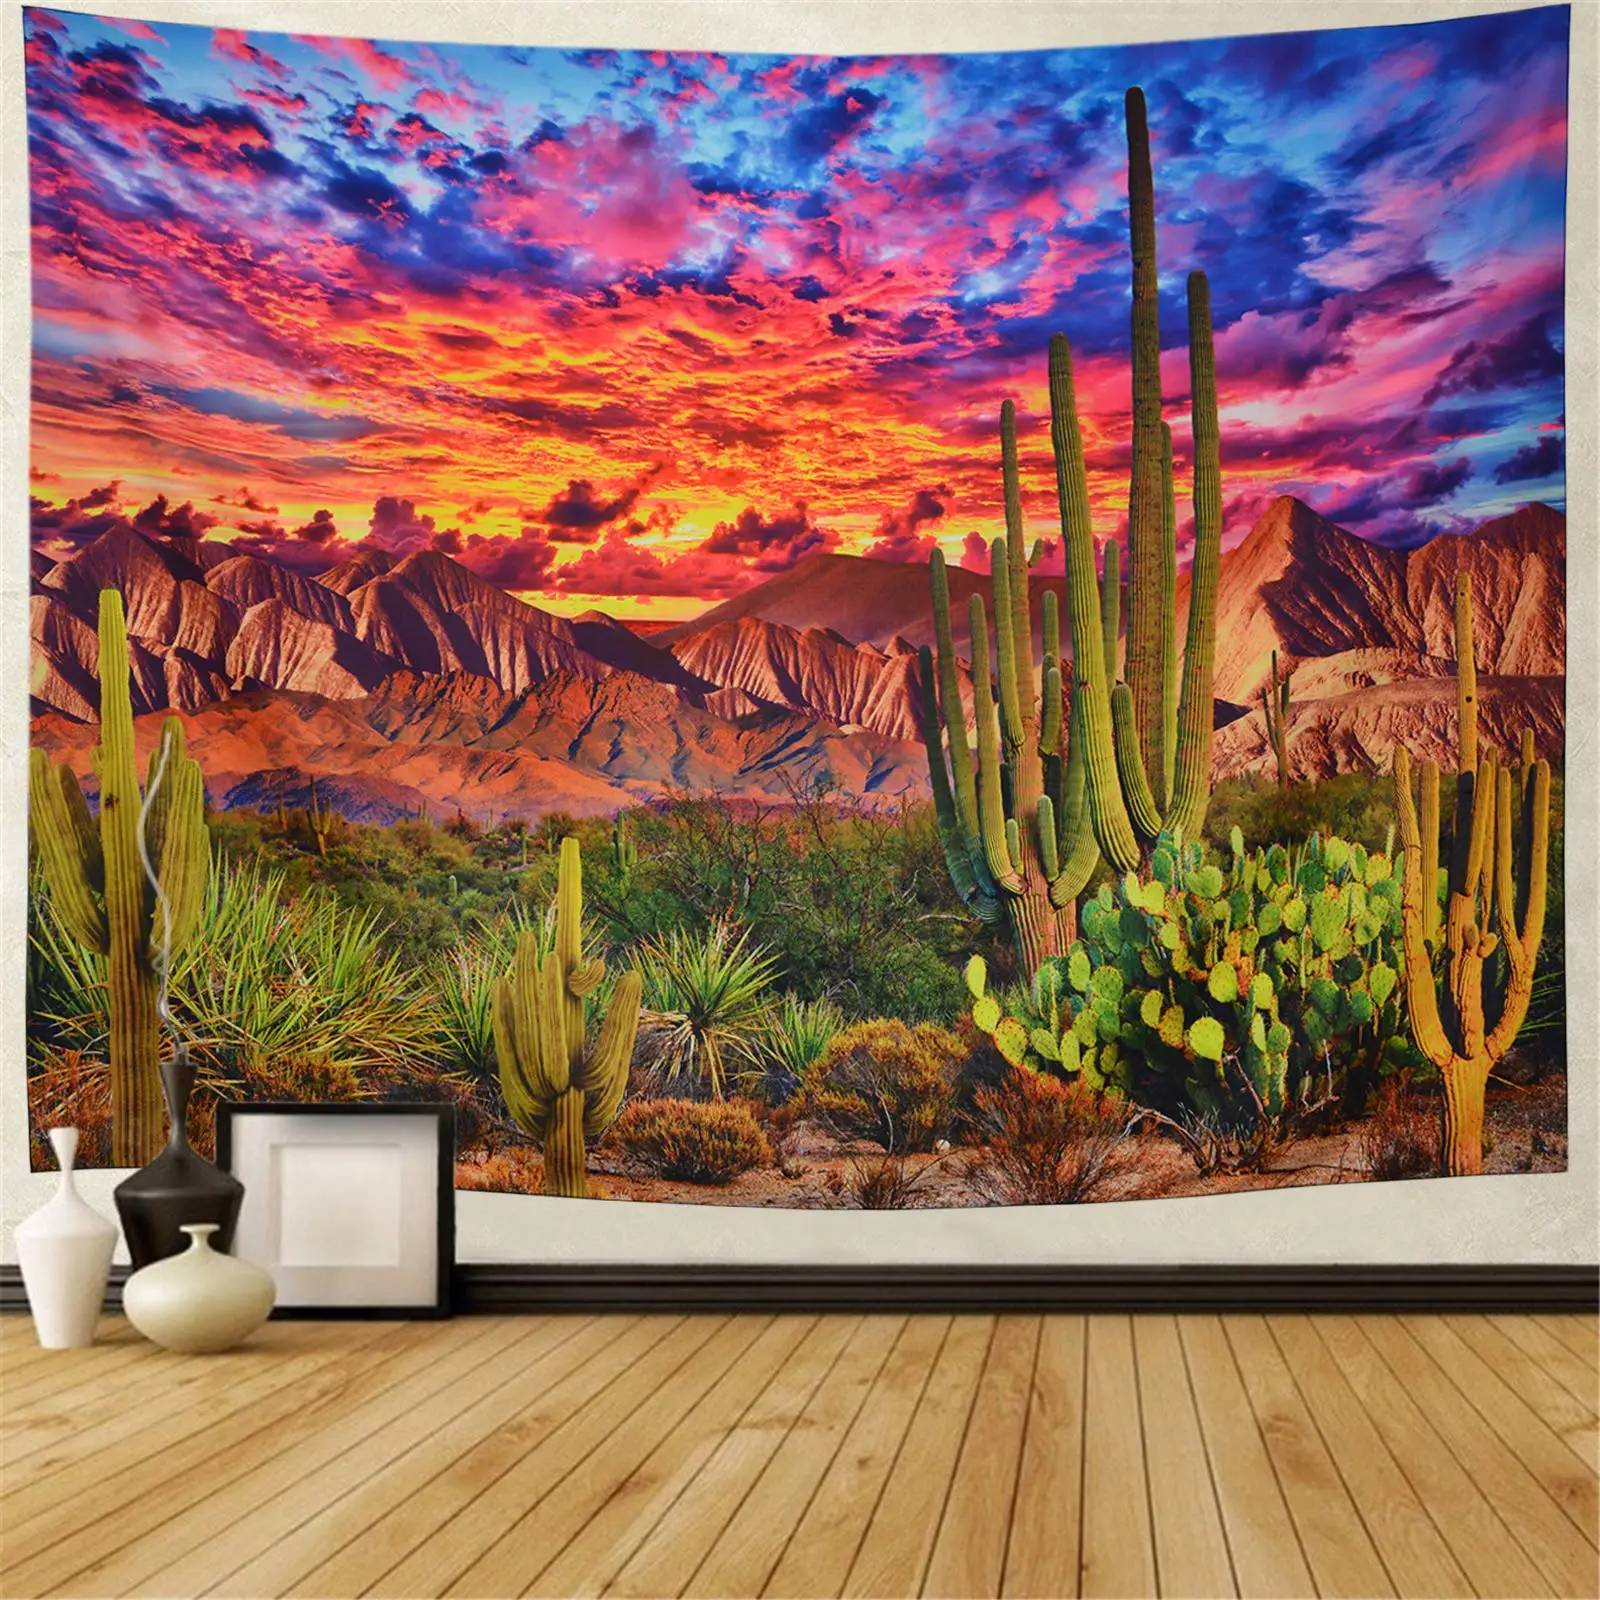 

Sunset Mountain Tapestry Desert Cactus Plants Tapestry Nature Scenery Tapestry Wall Hanging for Bedroom Living Room Dorm Decor